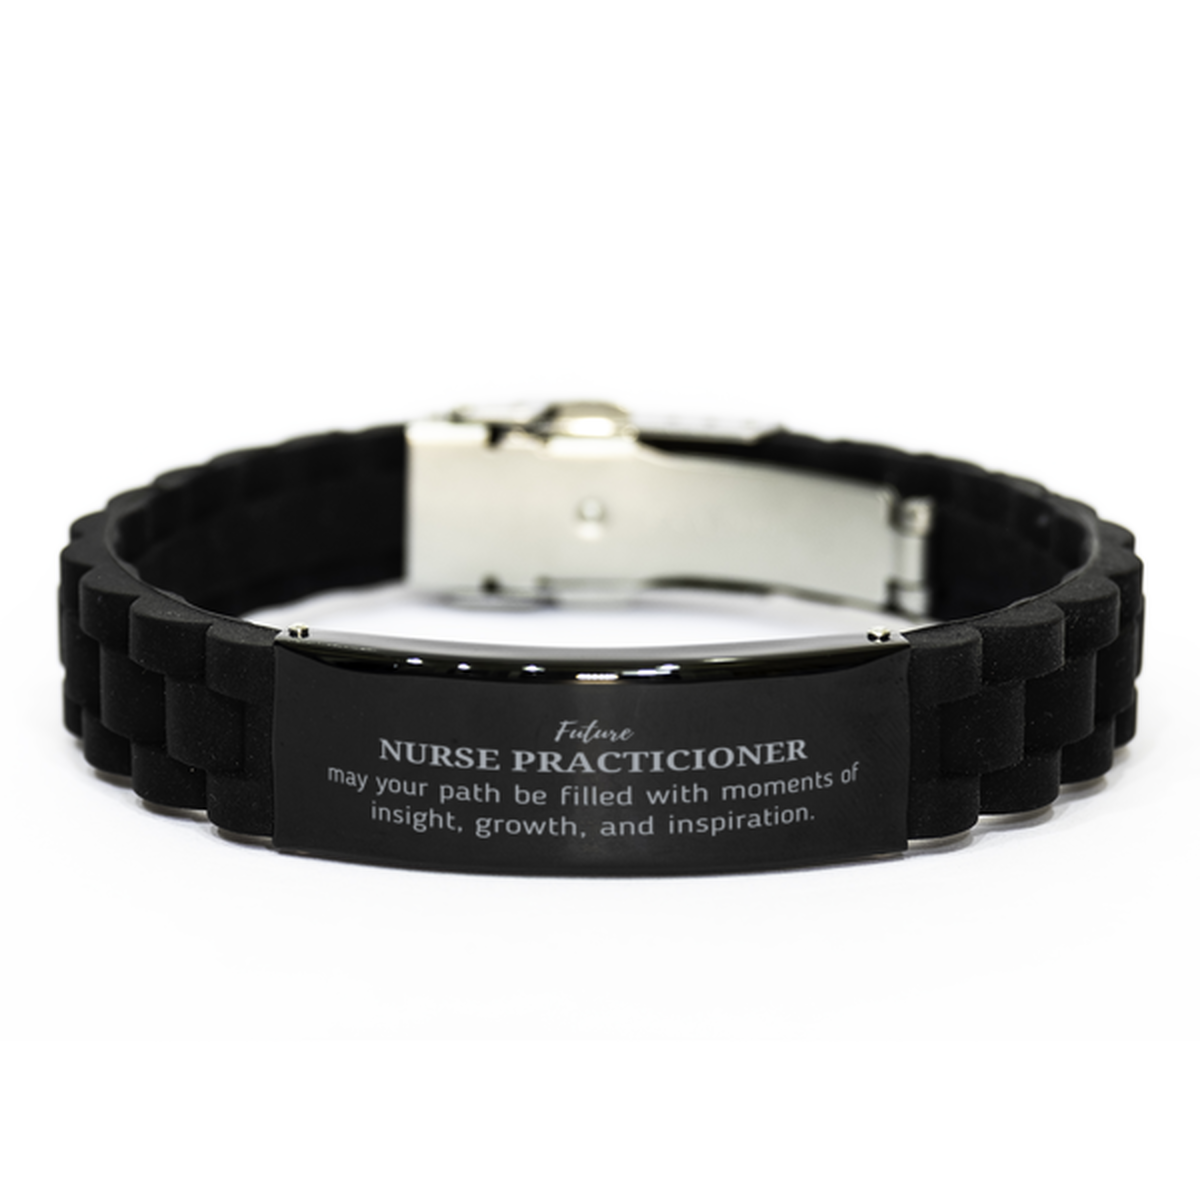 Future Nurse Practicioner Gifts, May your path be filled with moments of insight, Graduation Gifts for New Nurse Practicioner, Christmas Unique Black Glidelock Clasp Bracelet For Men, Women, Friends